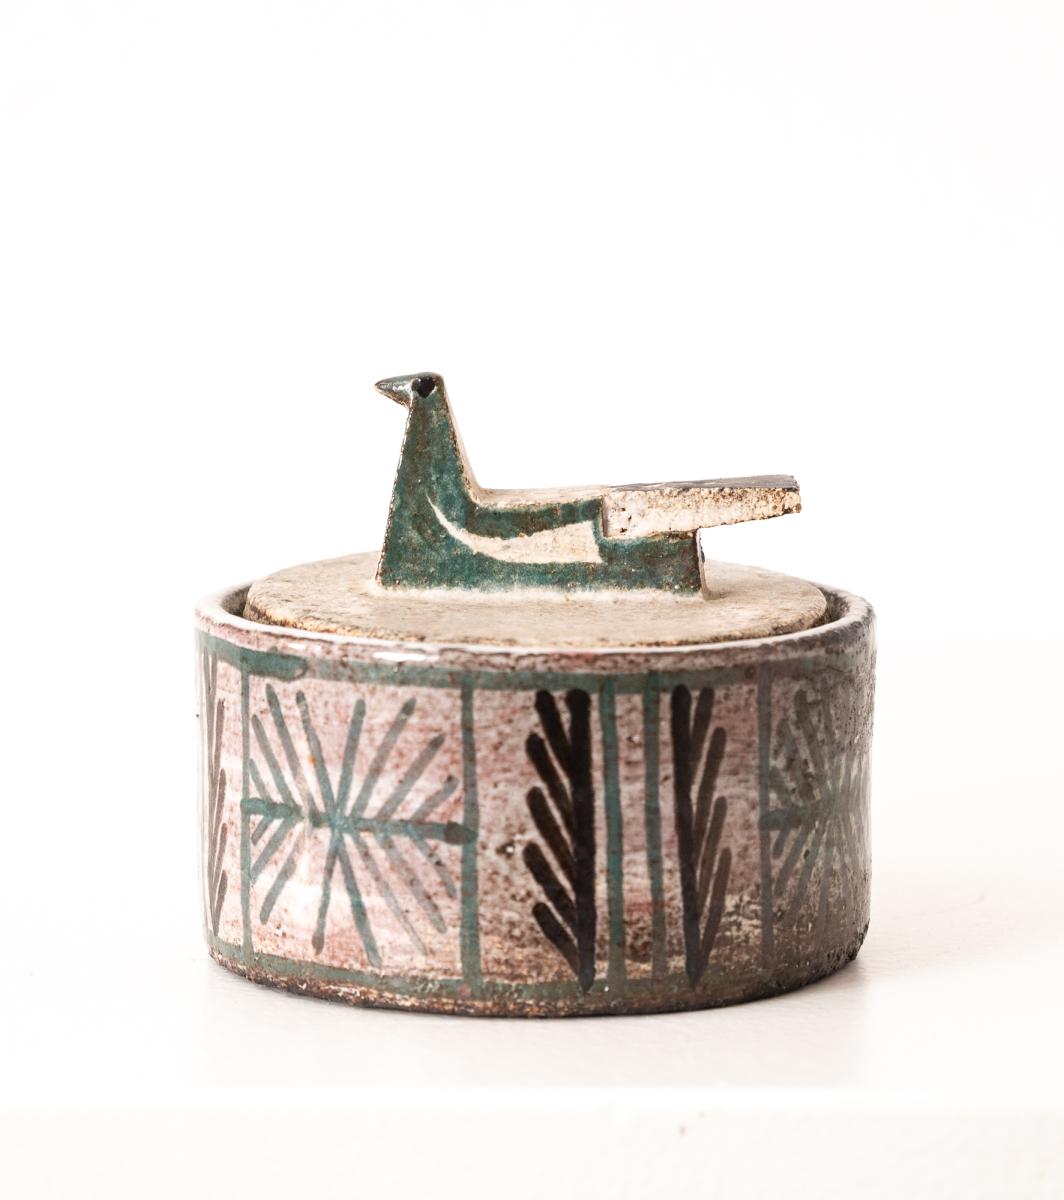 Covered pot by Jean Derval